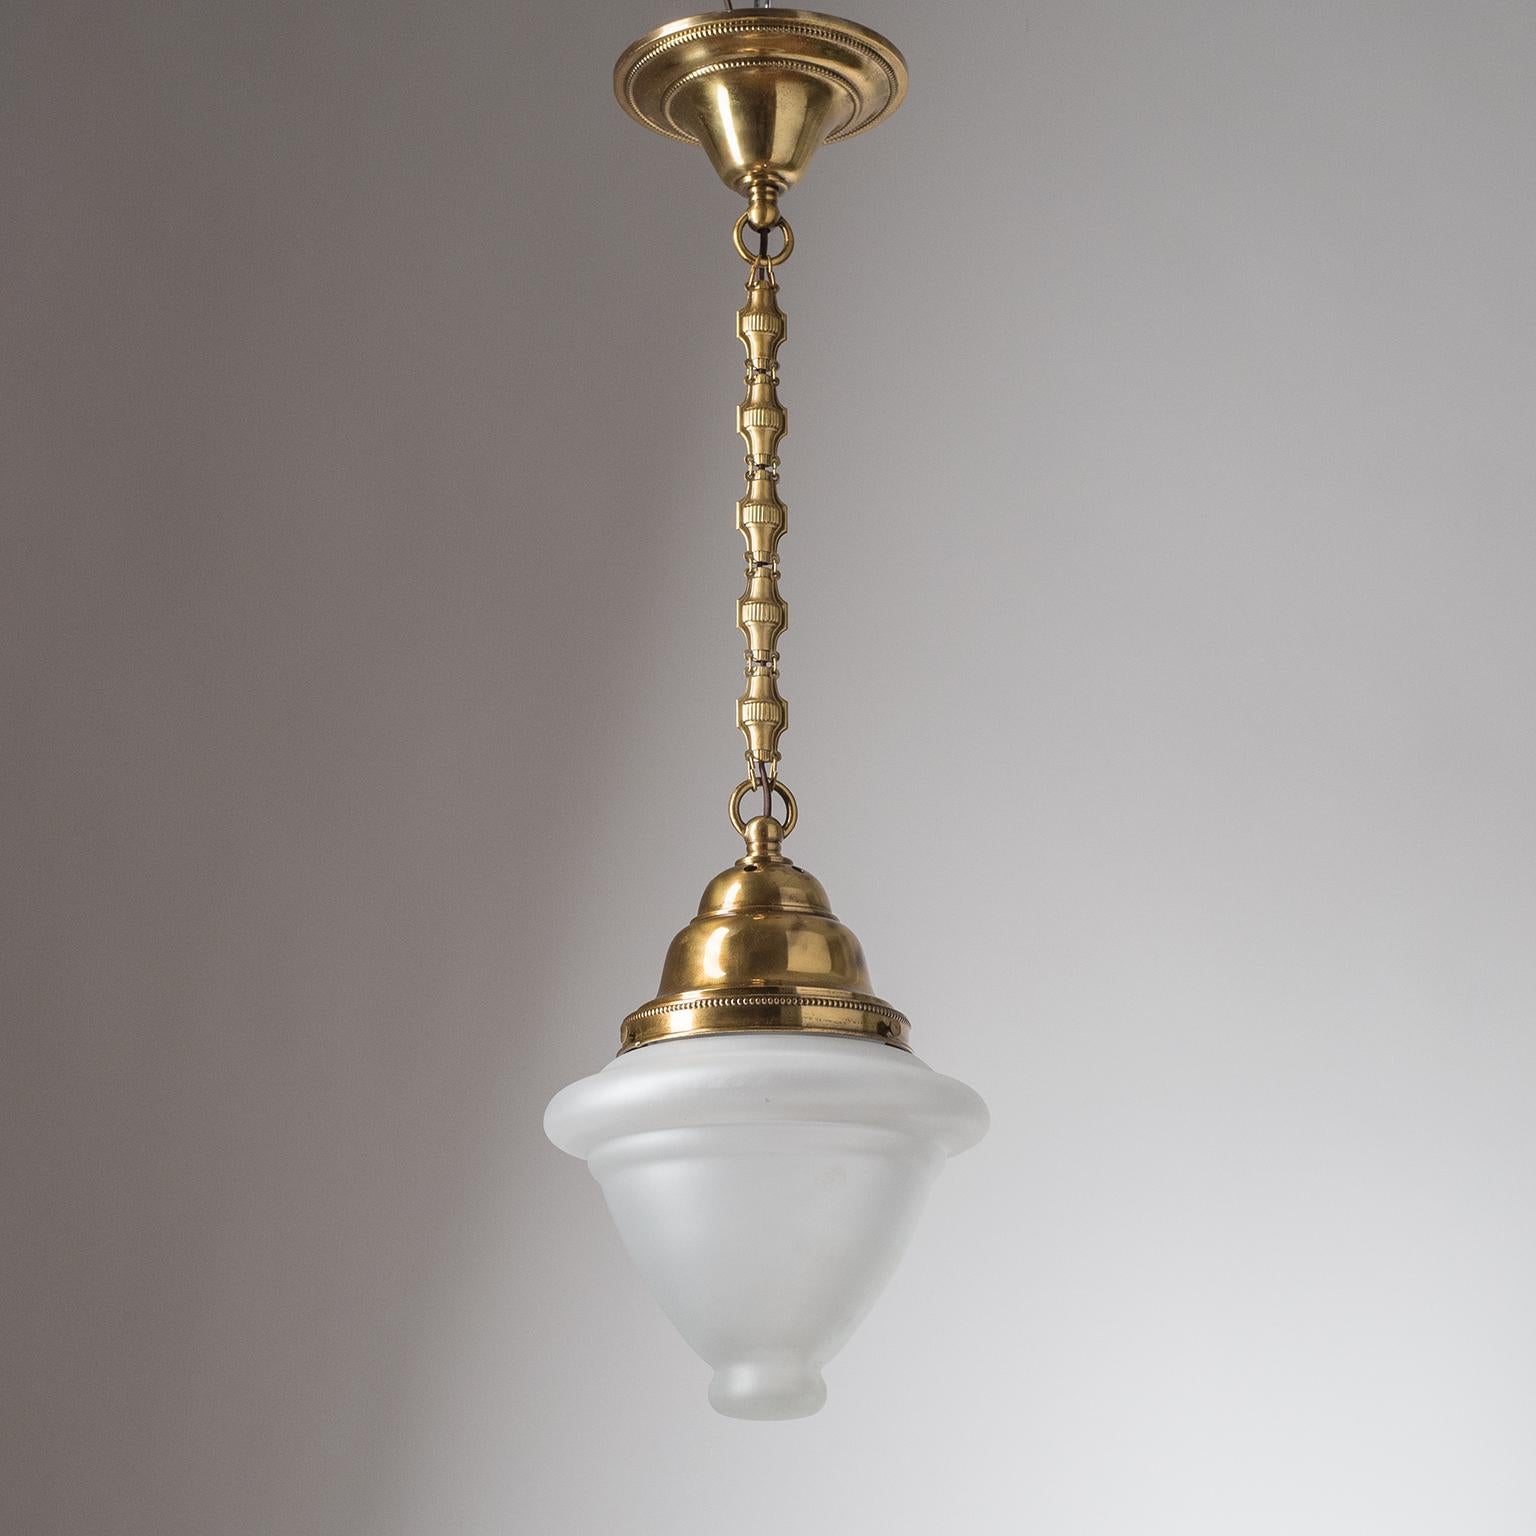 Fine Austrian brass pendant from the 1910-1920s. Clear glass diffuser with a satin finish on the outside. One original brass and ceramic E27 socket with new wiring. Height without chain is approximately 15inches/38cm.